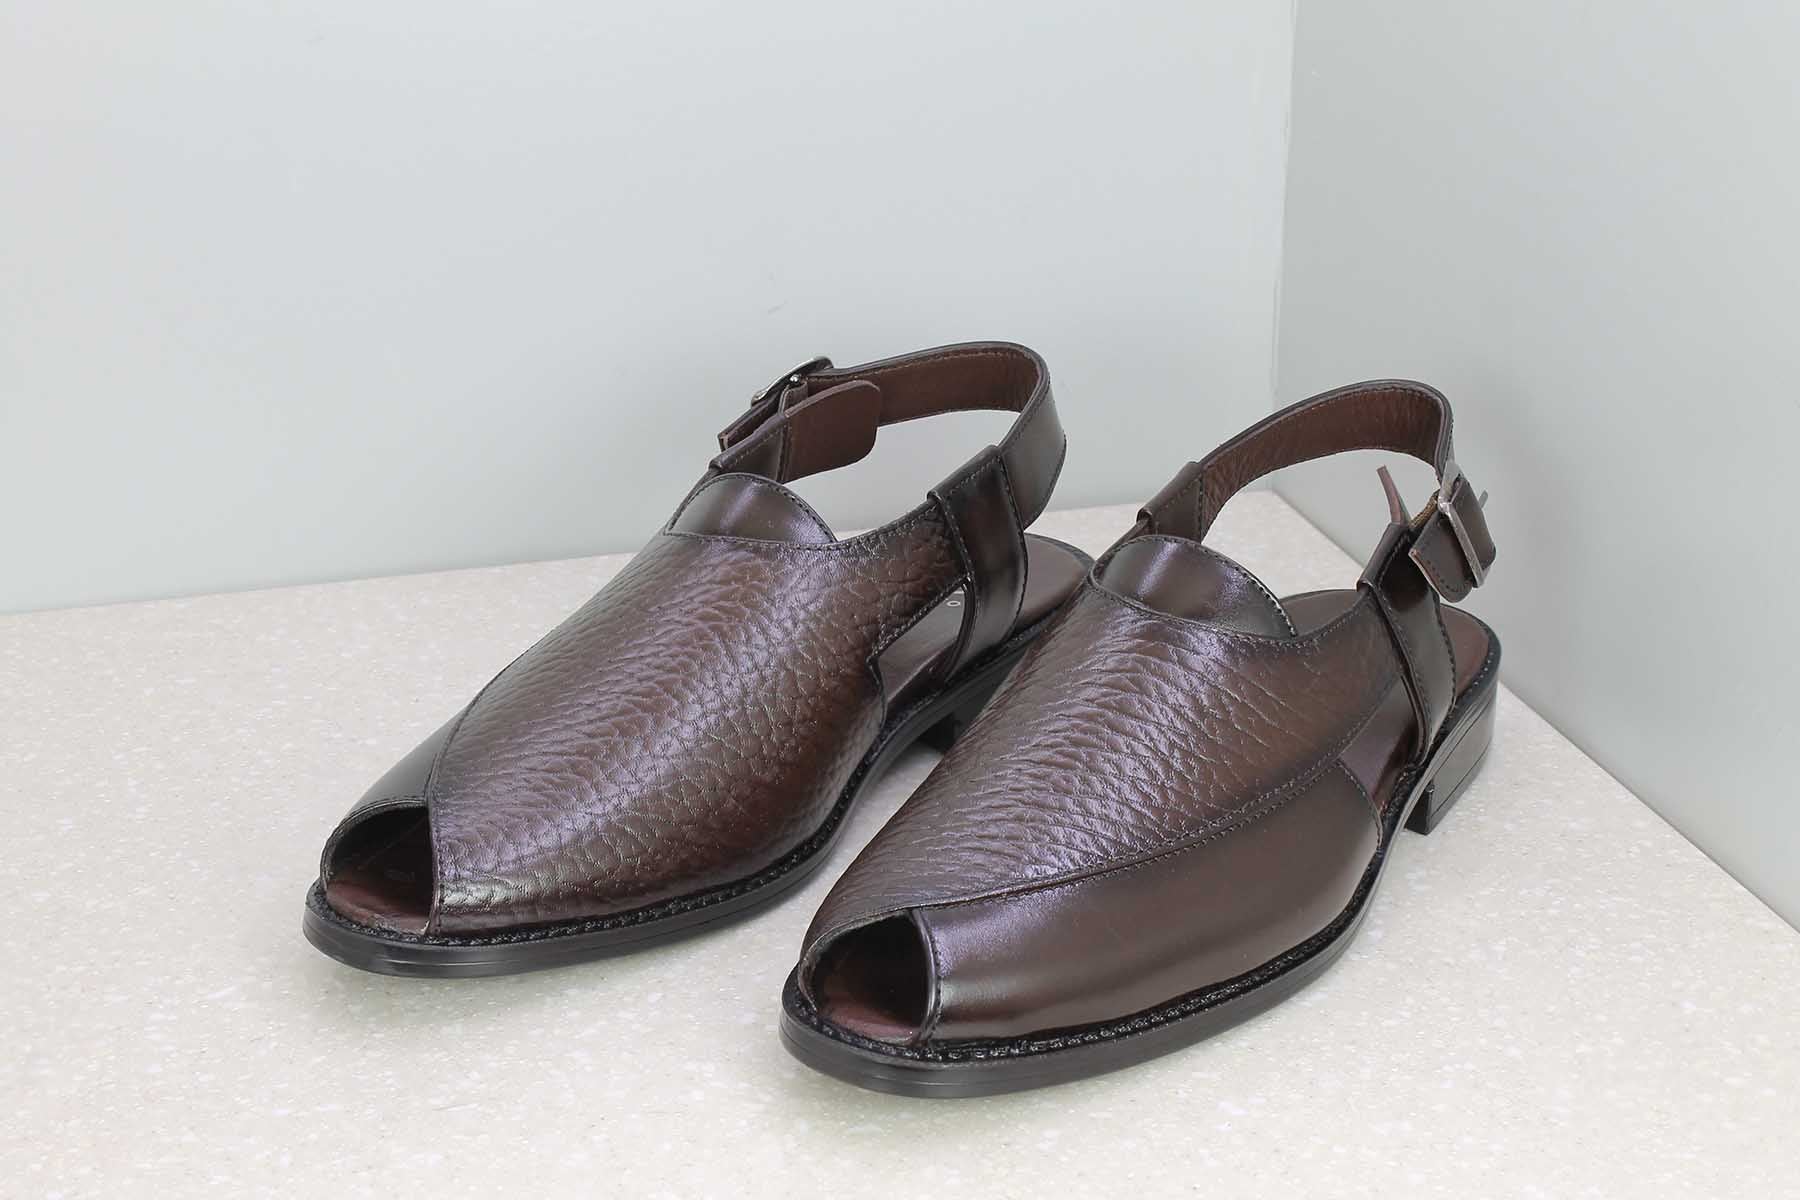 Buy Burwood Men's Brown Leather Formal Sandals-8 UK/India (42 EU)(BW 14)  Online at Lowest Price Ever in India | Check Reviews & Ratings - Shop The  World